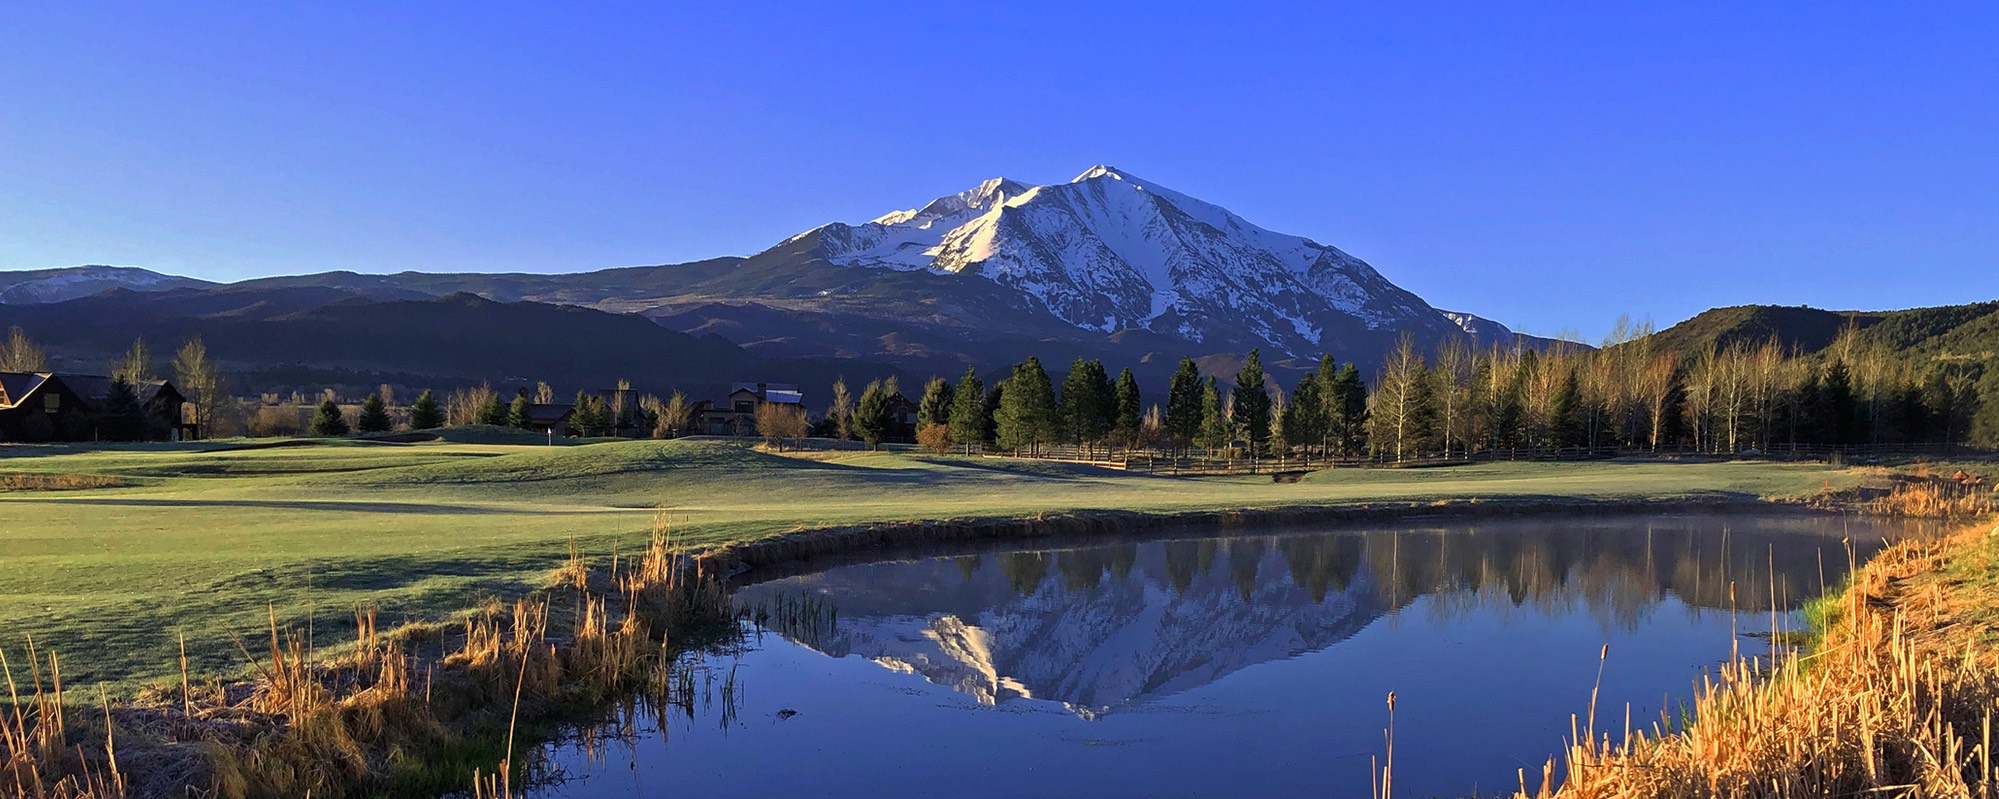 Capturing the scenic beauty of River Valley Ranch's golf course, this photo features Mt. Sopris gracing the background. The course includes a picturesque pond that perfectly mirrors the majestic mountain views, creating a captivating and beautiful scene.